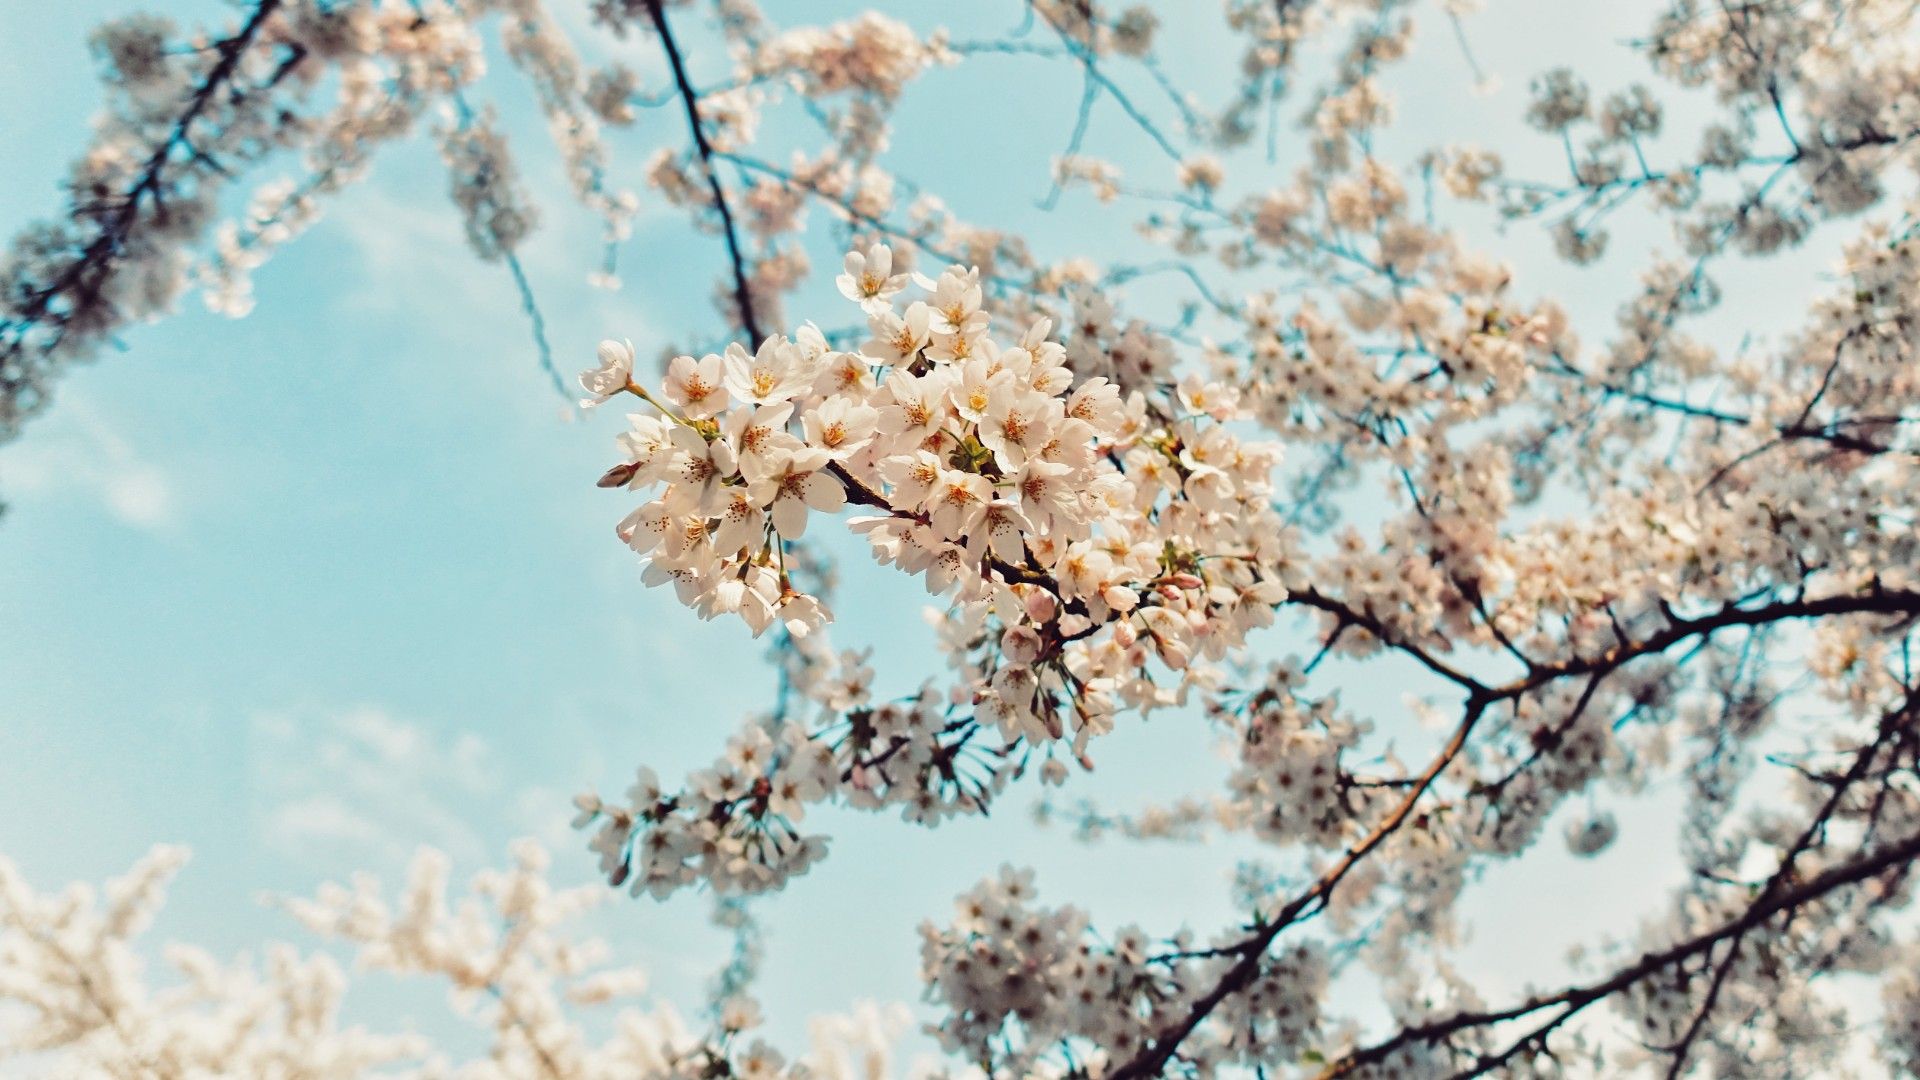 A tree with white flowers in the sky - Spring